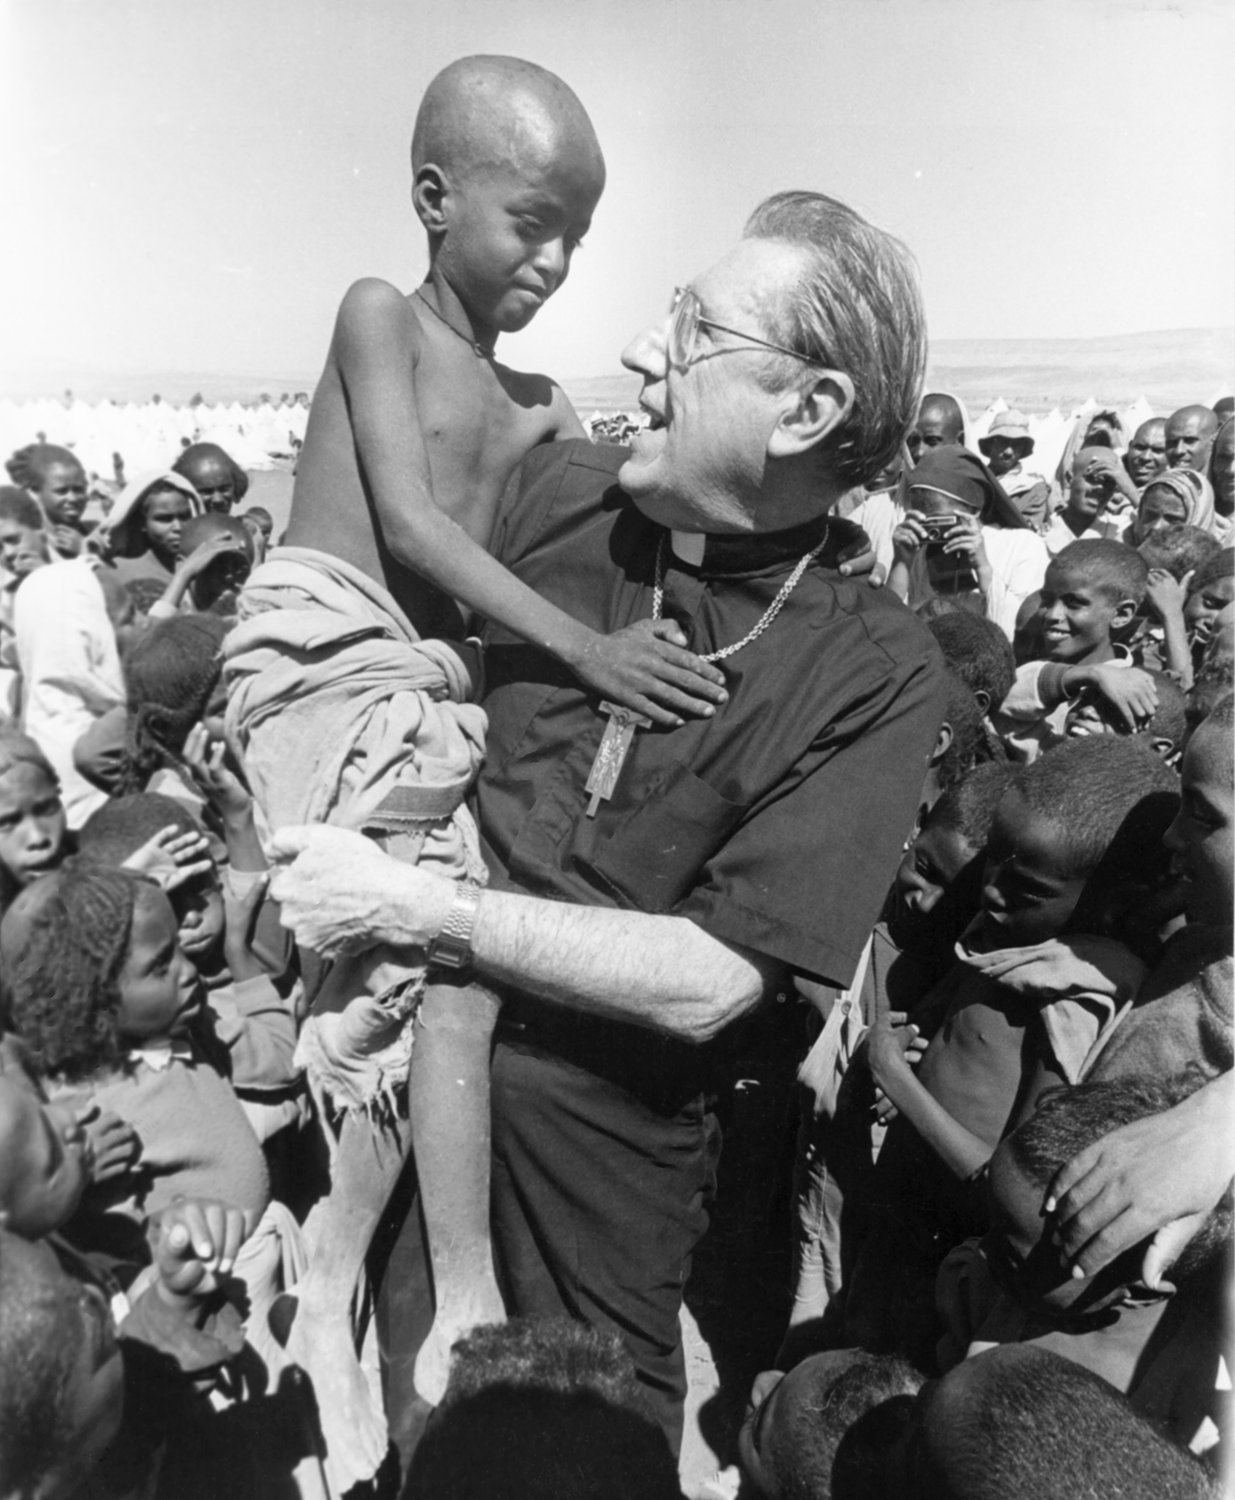 Cardinal John O’Connor, then-archbishop of New York, lifts a boy during a pastoral visit to Ethiopia in February 1985. The cardinal made the trip in his role as president of the Catholic Near East Welfare Association. Gerald M. Costello covered the journey in his role as editor in chief of Catholic New York.